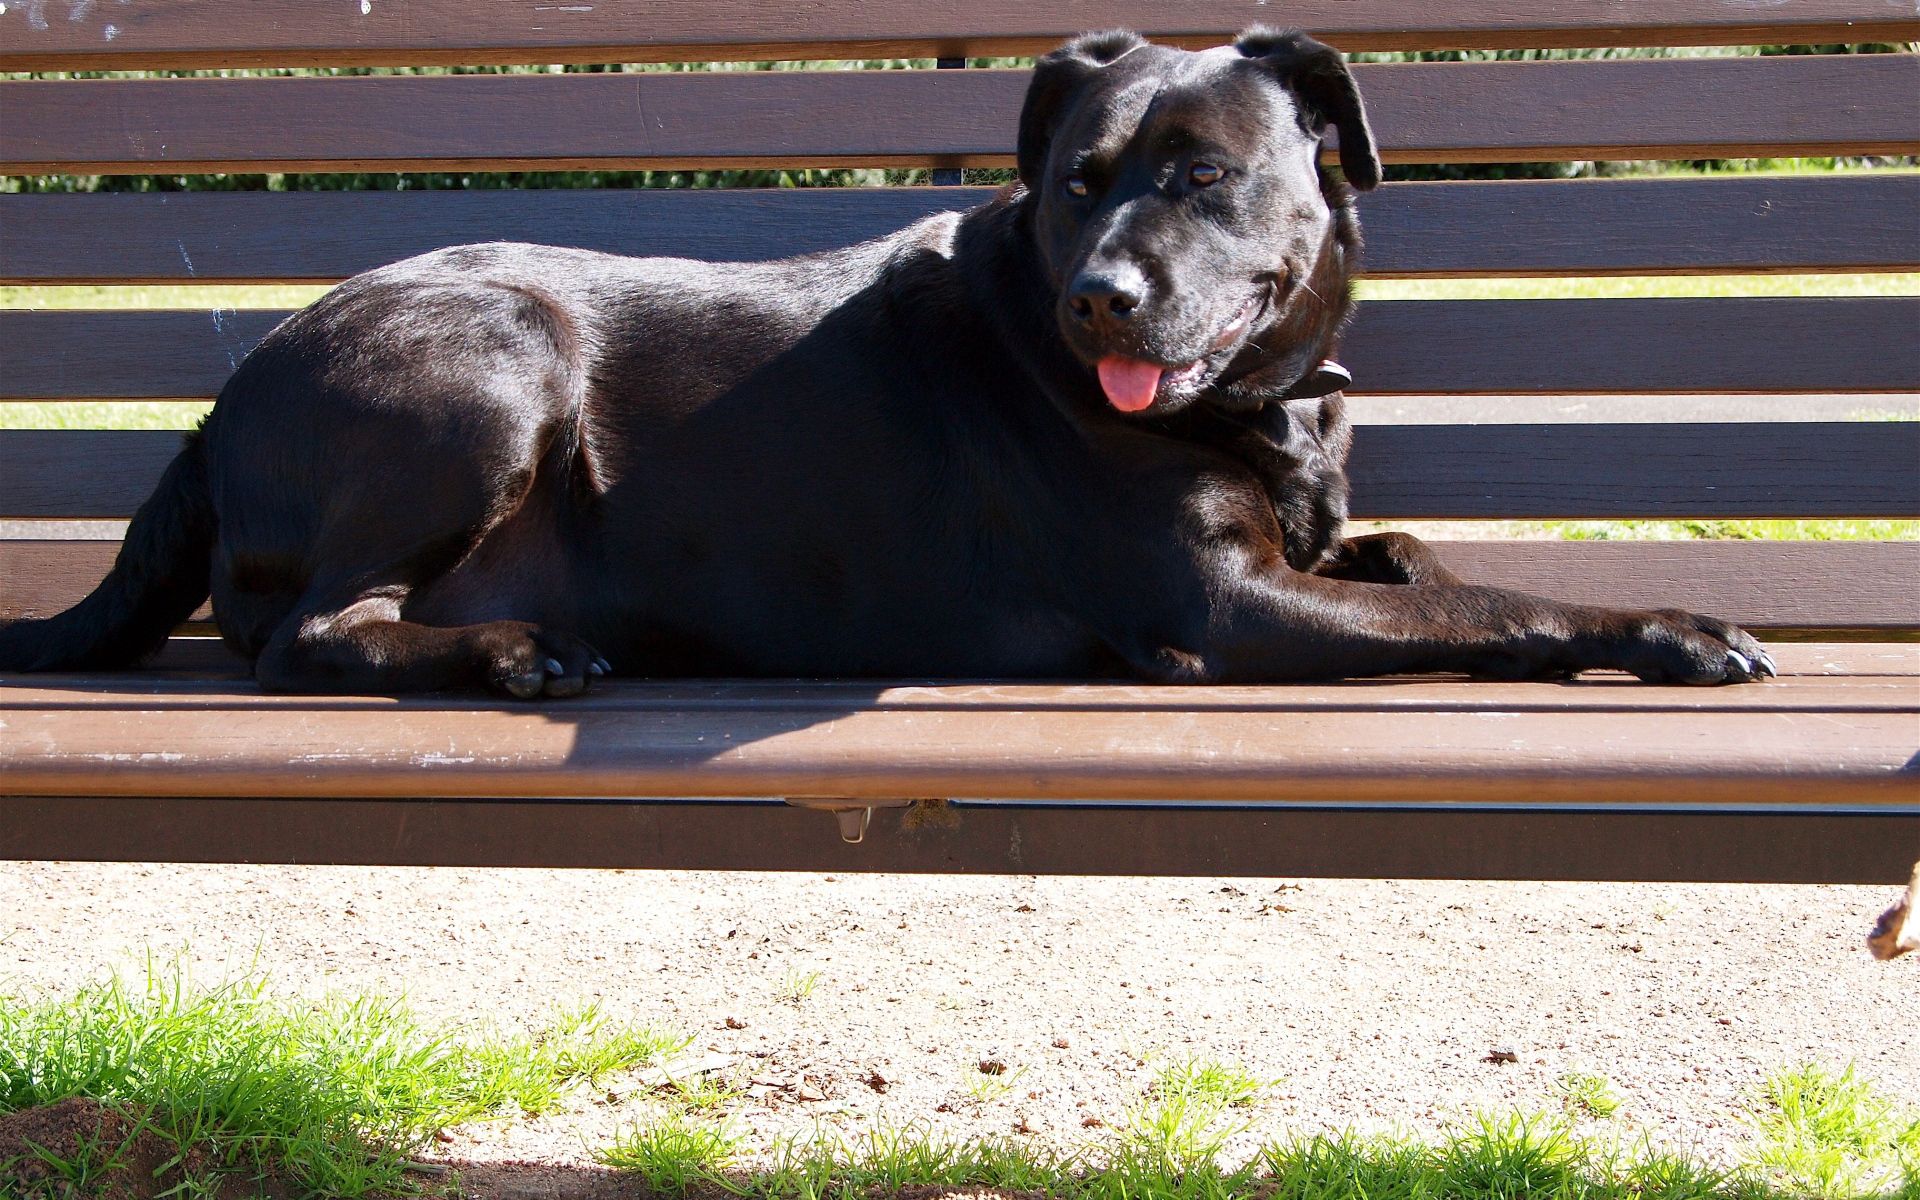 animals, to lie down, lie, dog, protruding tongue, tongue stuck out, bench